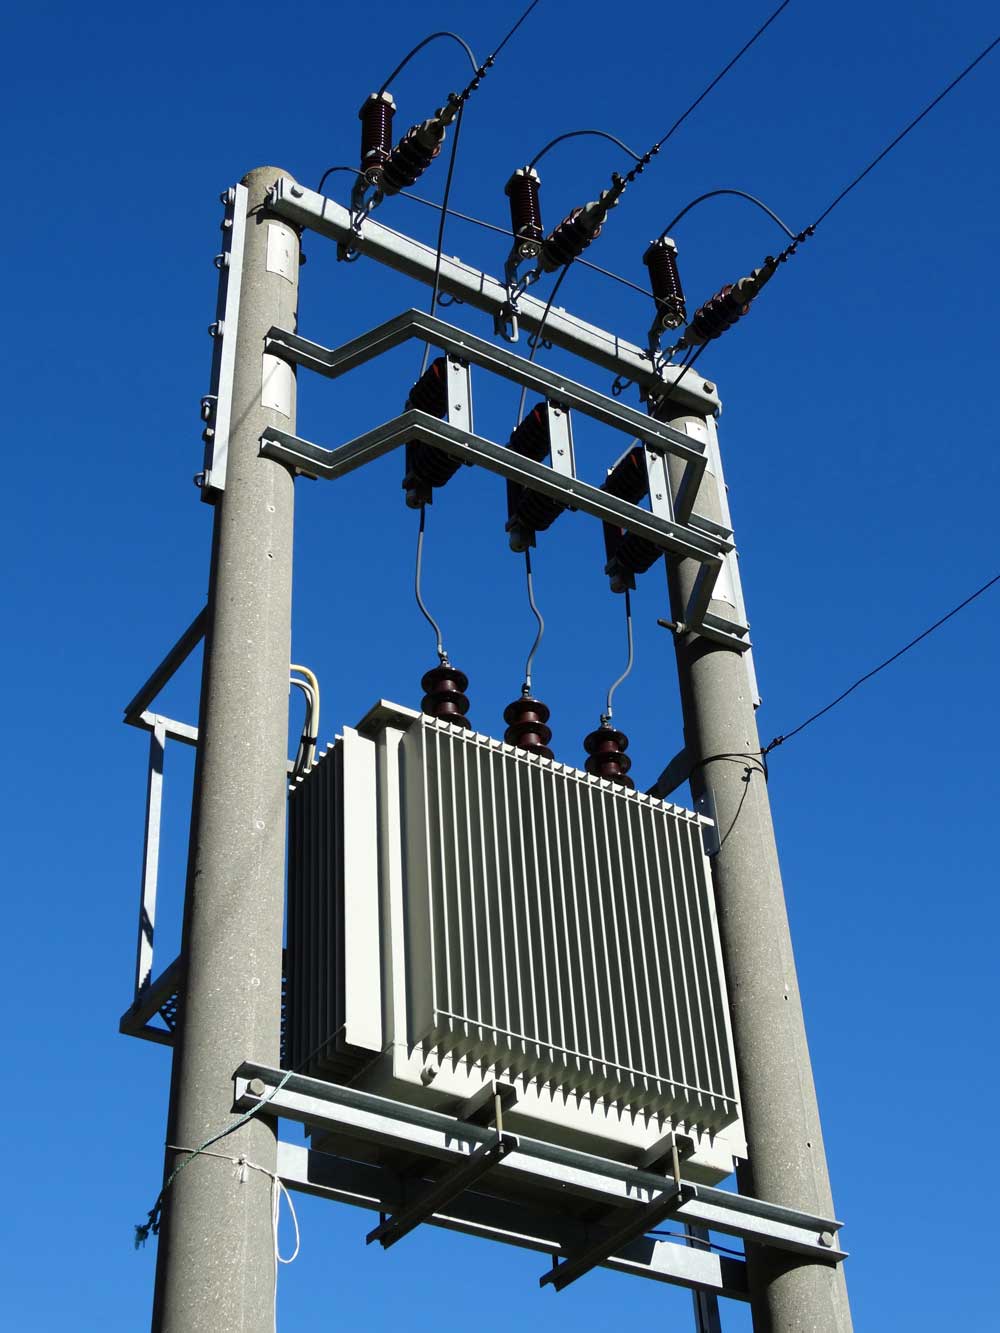 A photo from below of a transformer and power lines with a blue sky in the background.